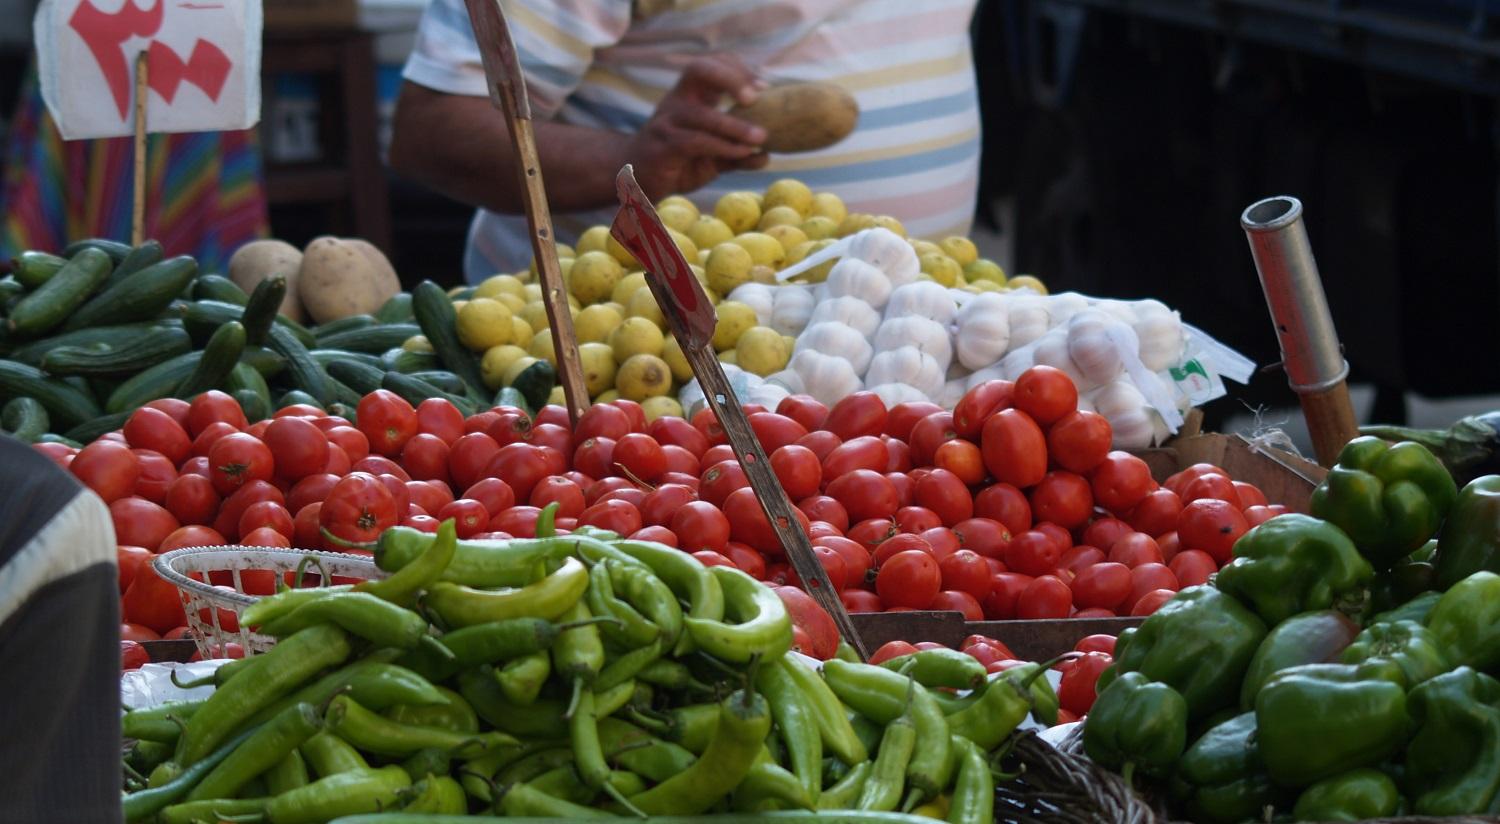 Organic, Chemical-Free & Unprocessed Food Sources in Egypt